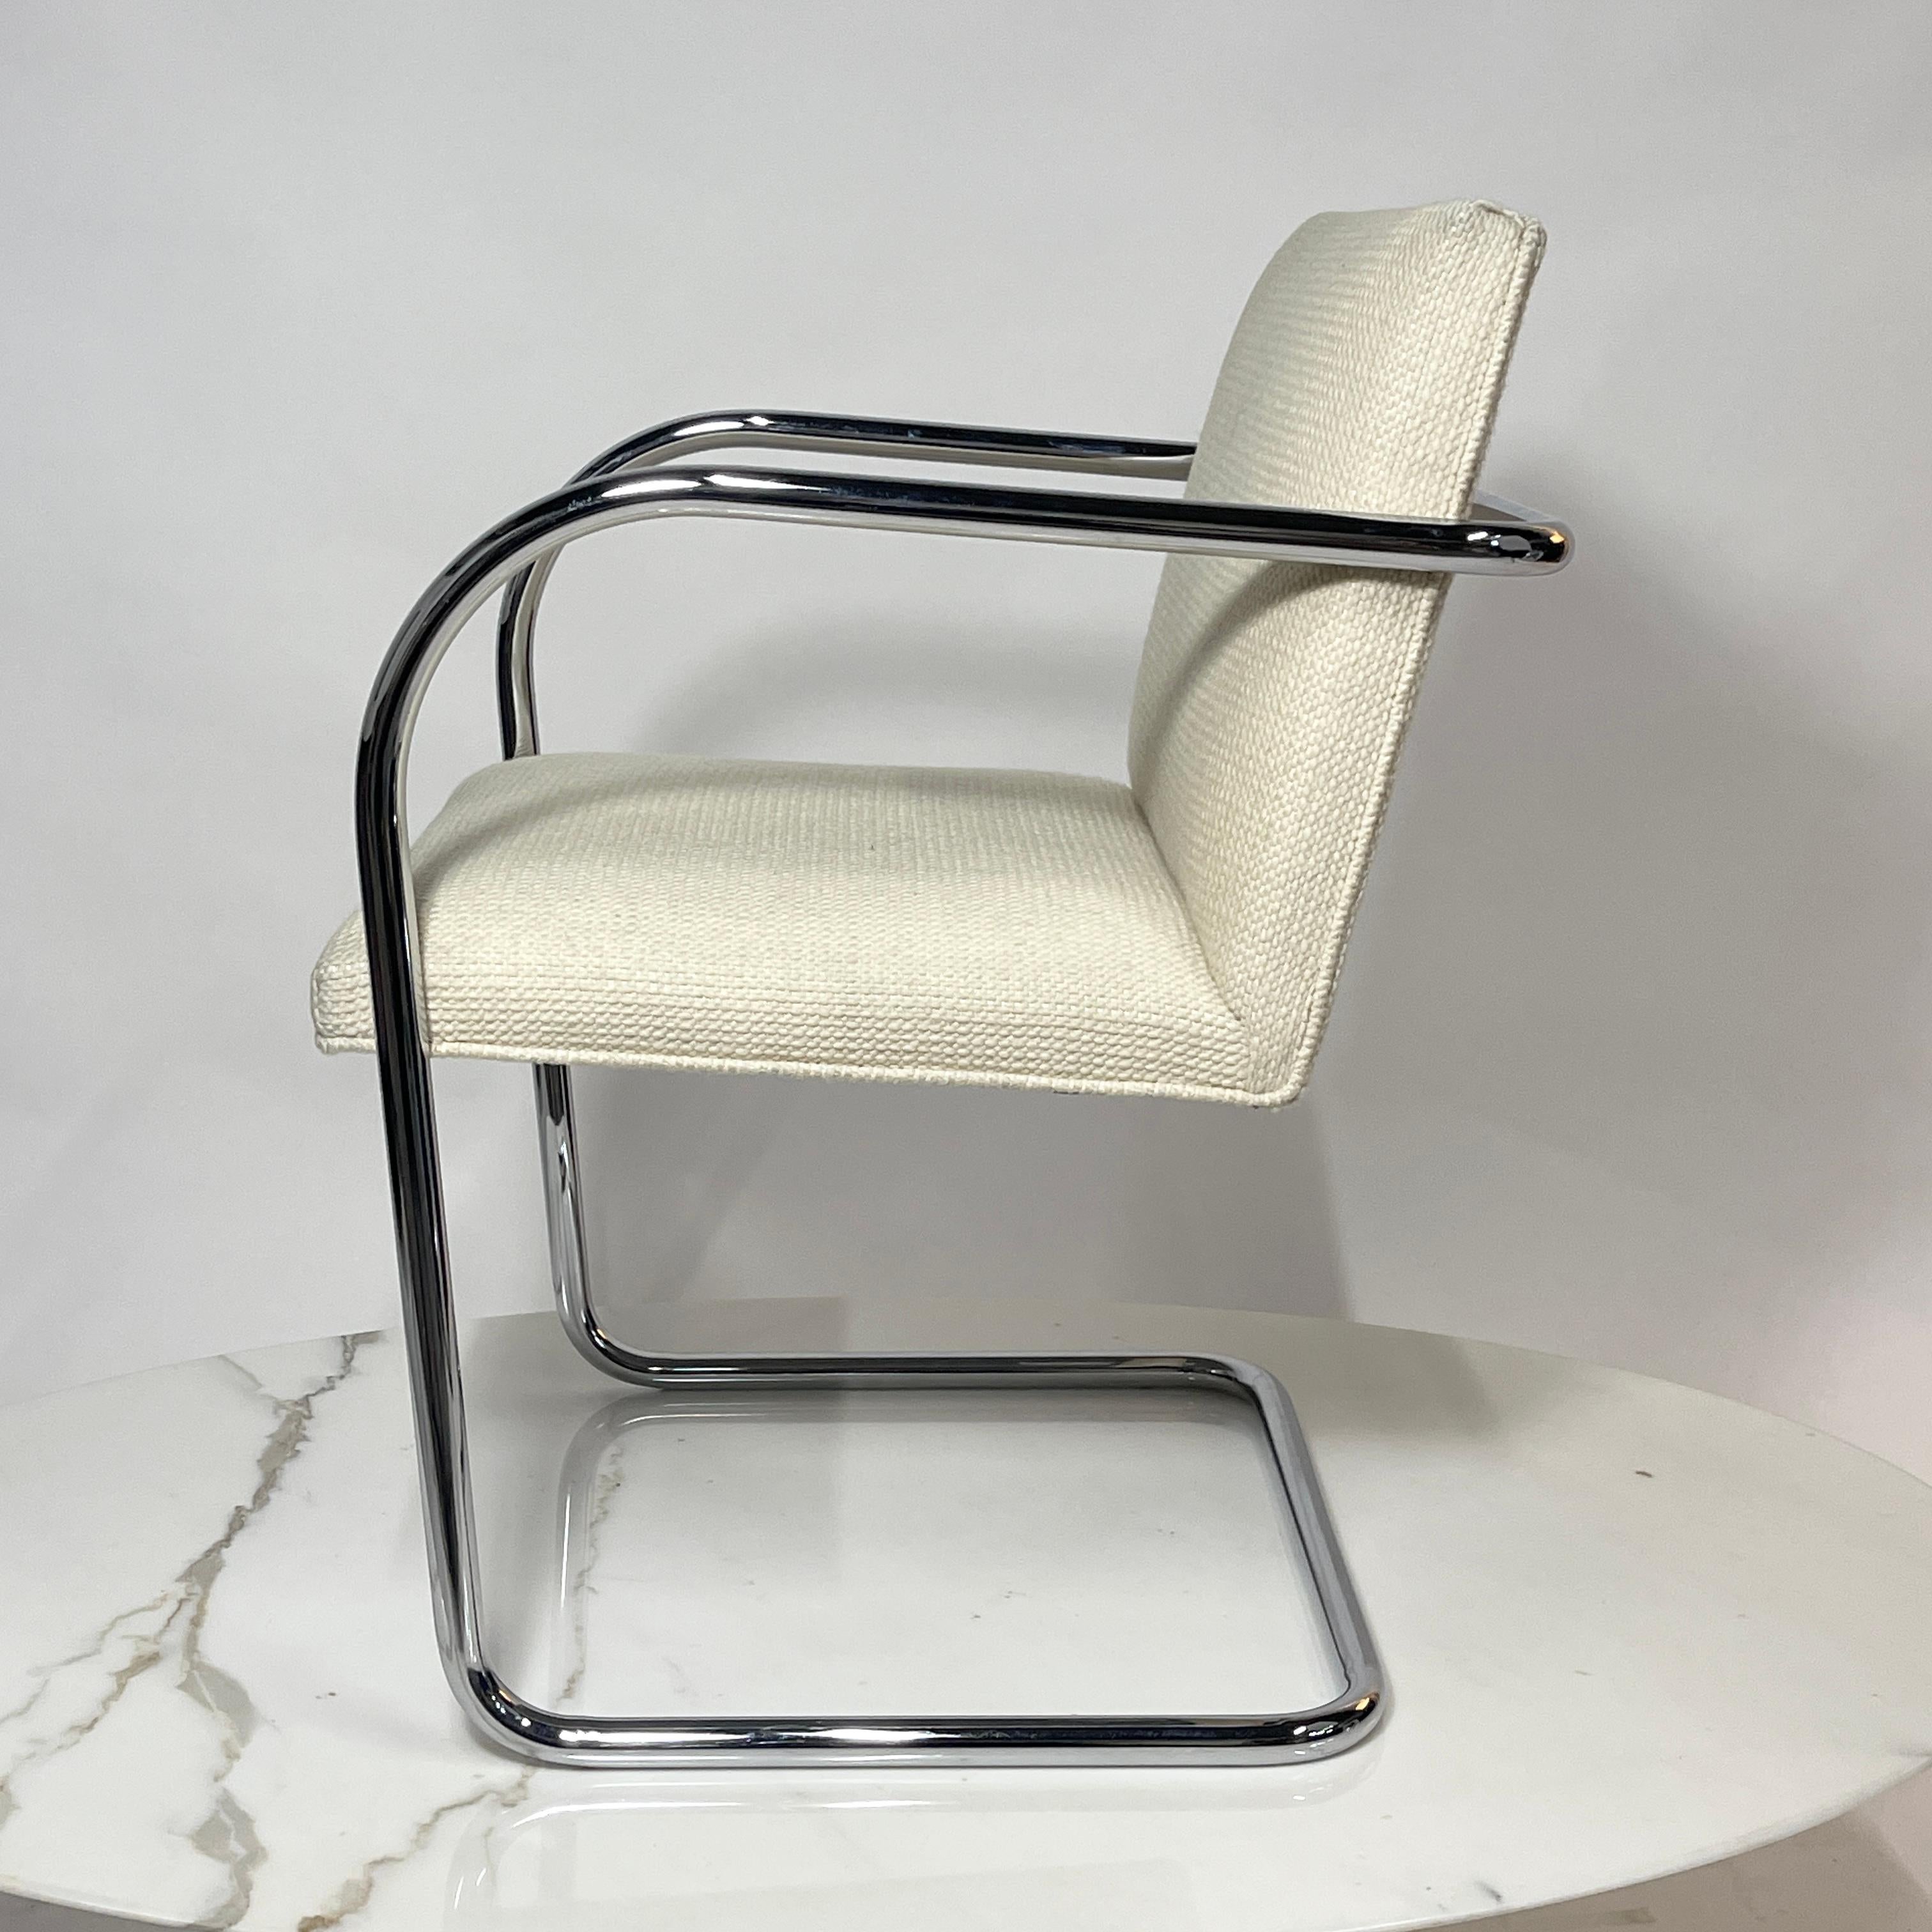 Italian Mies Van Der Rohe for Knoll Brno Chair in Cato Upholstery 60 available For Sale